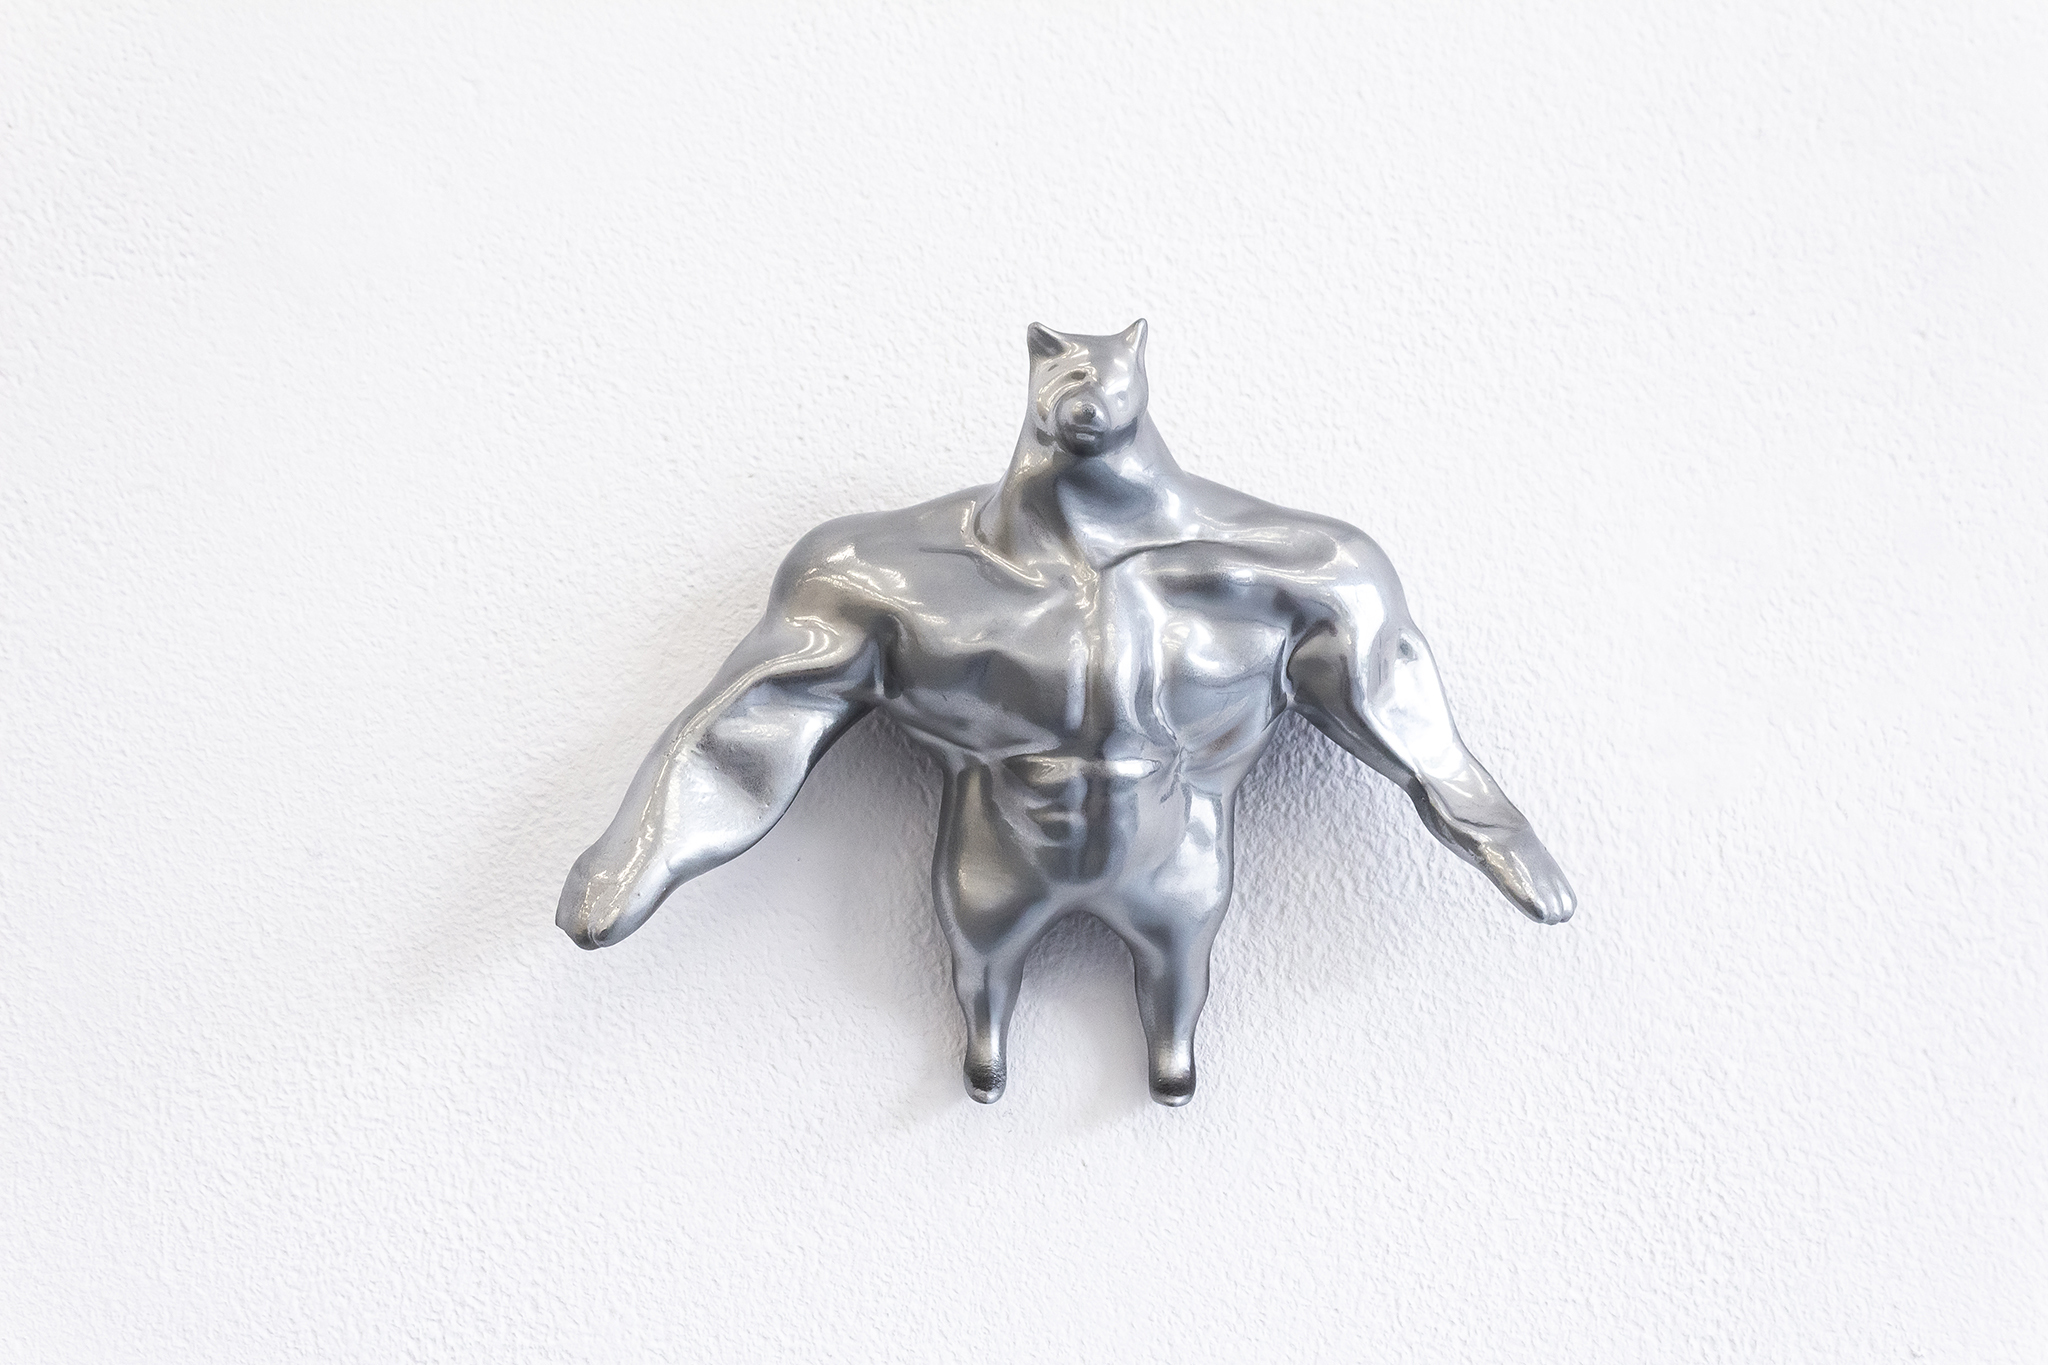 There Are Two Doges Inside of You, objects: 3D prints, chrome paint, 10x13x4 cm each, 2023.